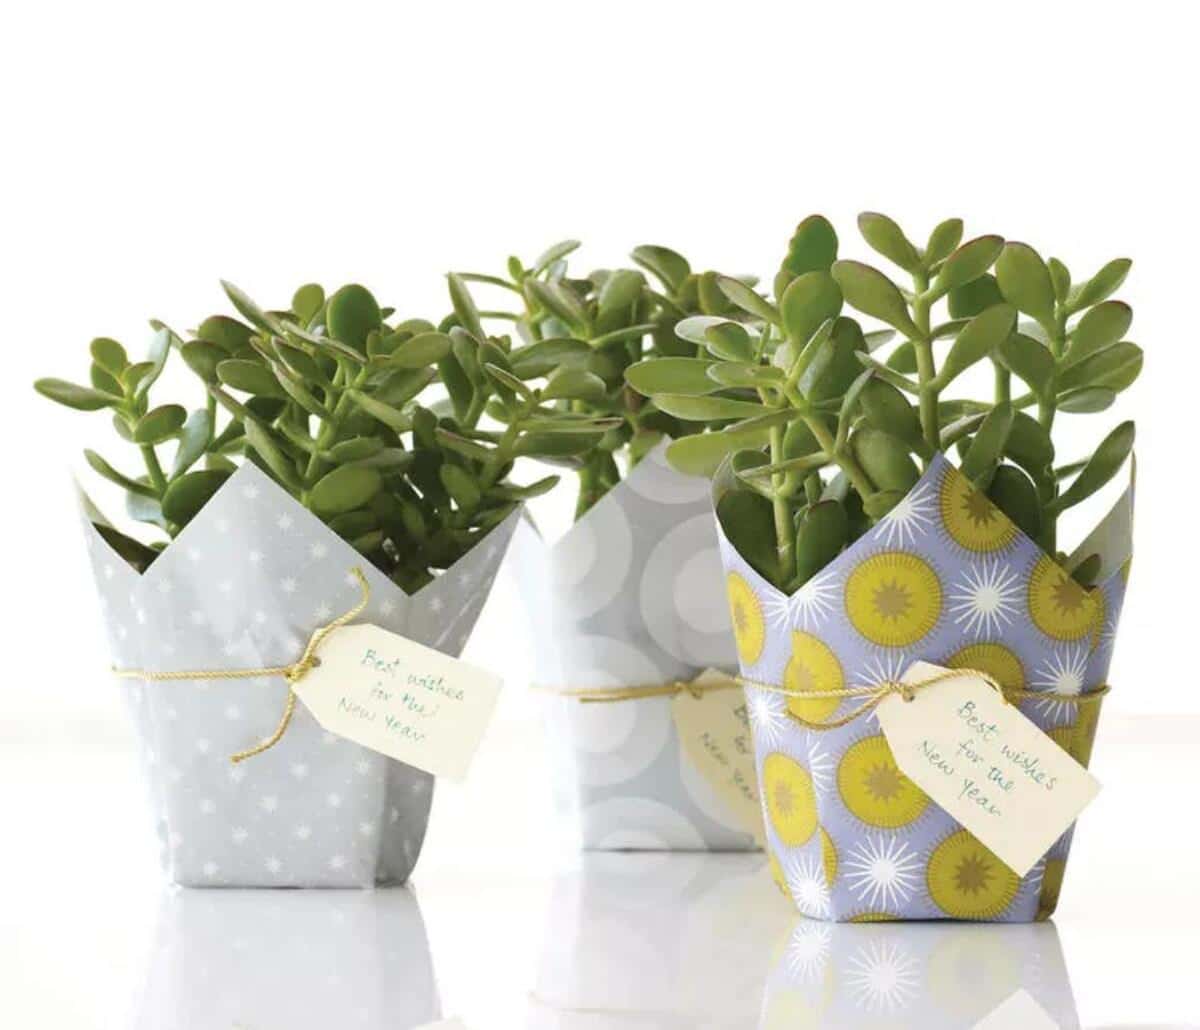 DIY wrapped potted plants.